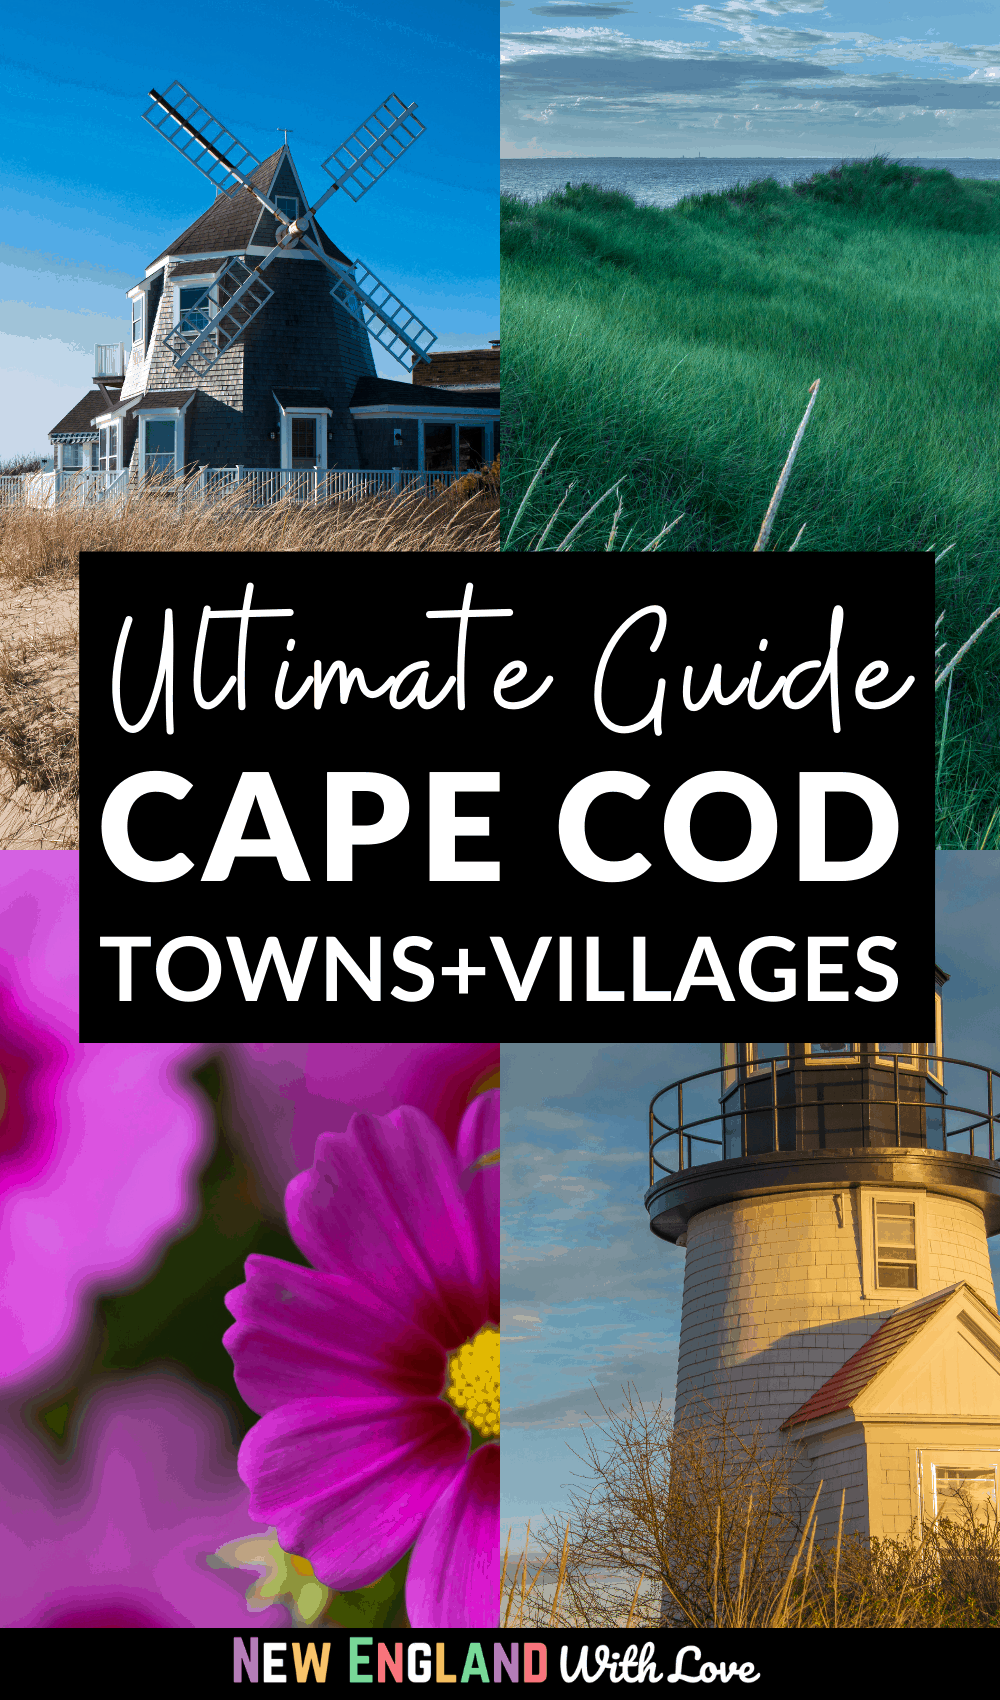 Pinterest sign reading "Ultimate Guide CAPE COD Towns & Villages"